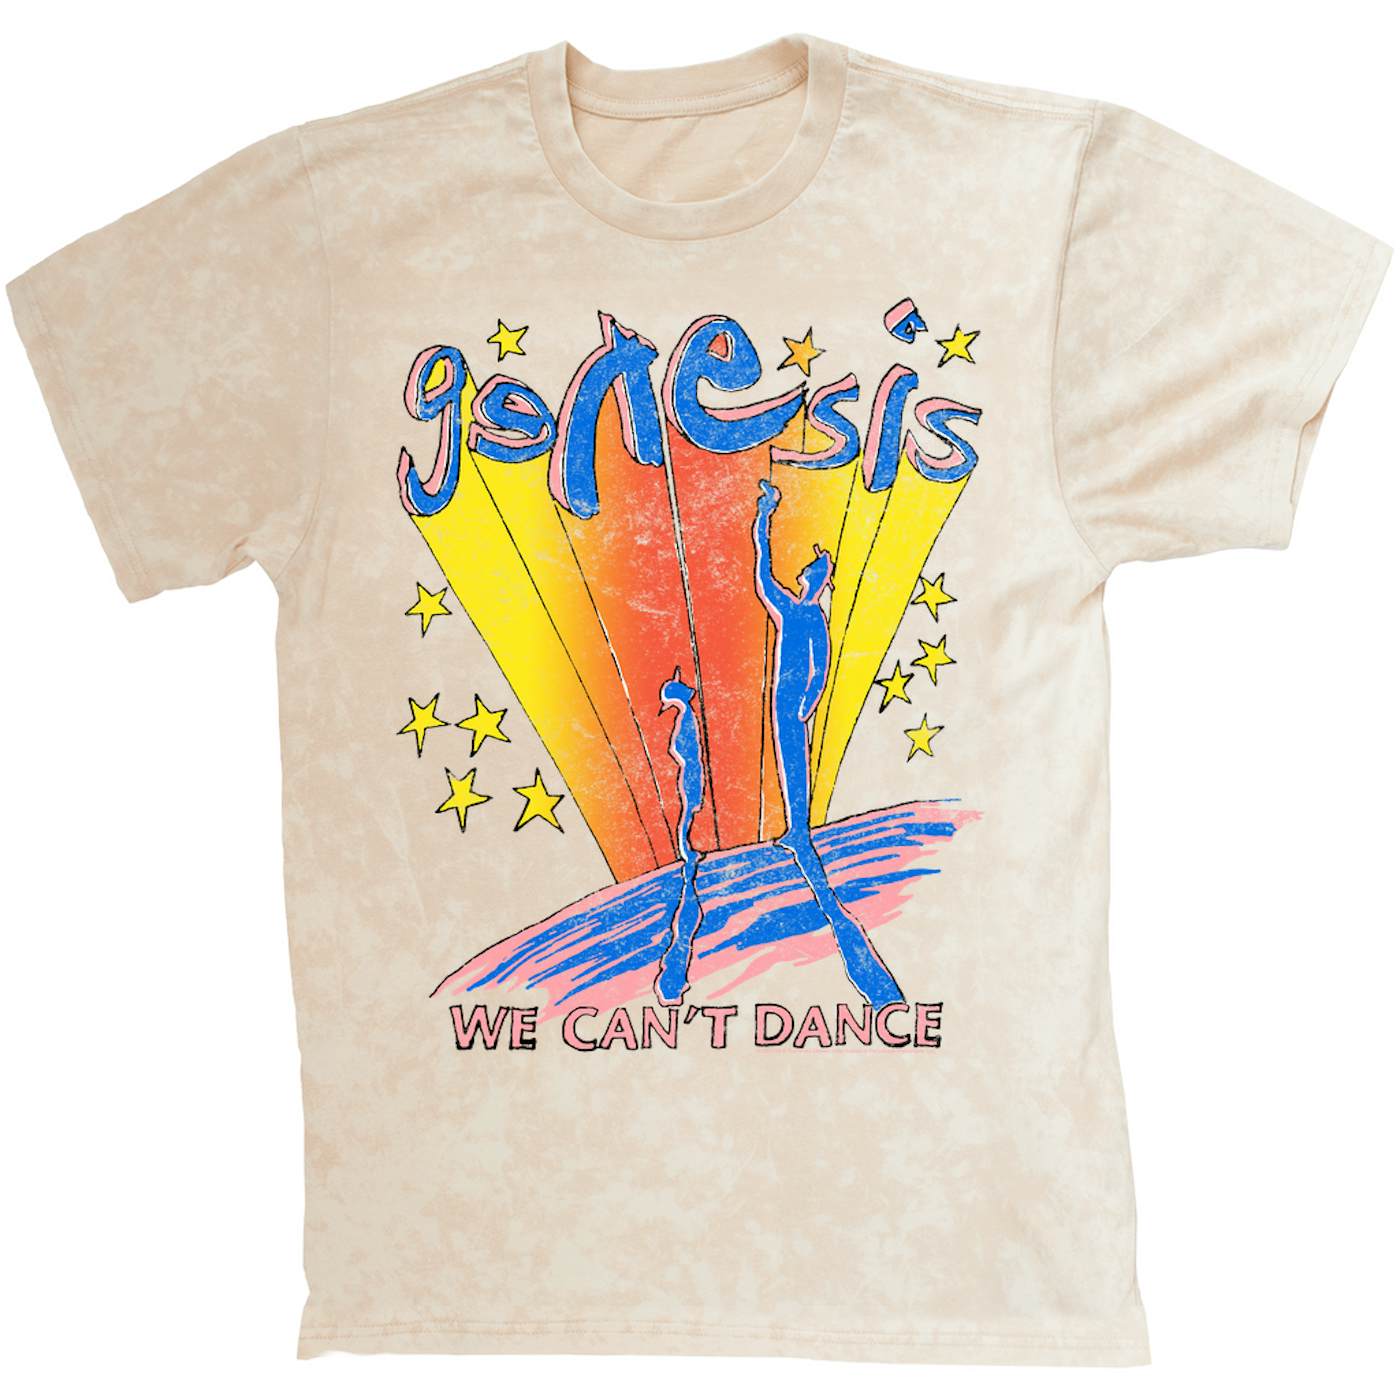 Genesis T-shirt | We Can't Dance Colorful Sketch Distressed Genesis Mineral Wash Shirt